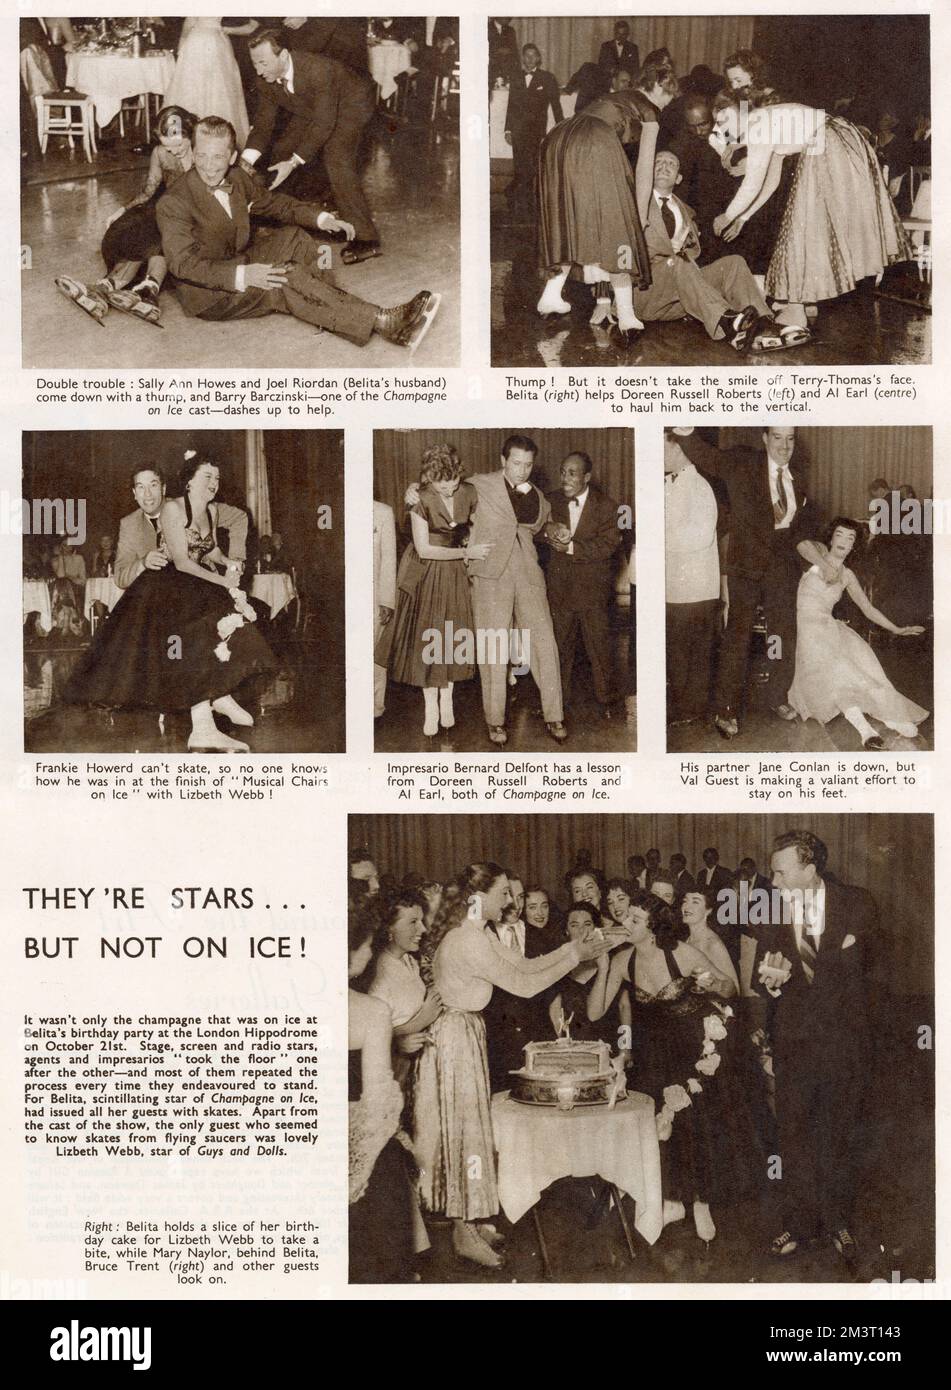 Page from The Sketch reporting on the birthday party of Belita (Maria Belita Jepson-Turner) at the London Hippodrome, at the time she was starring the show 'Champagne on Ice'. The HIppodrome's old arena area was turned into a rink for the show, and the party took place on the ice, with various celebrities including Frankie Howerd, Lizbeth Webb, Terry Thomas and Bernard Delfont tackling the challenge of skating with various degrees of success. Stock Photo